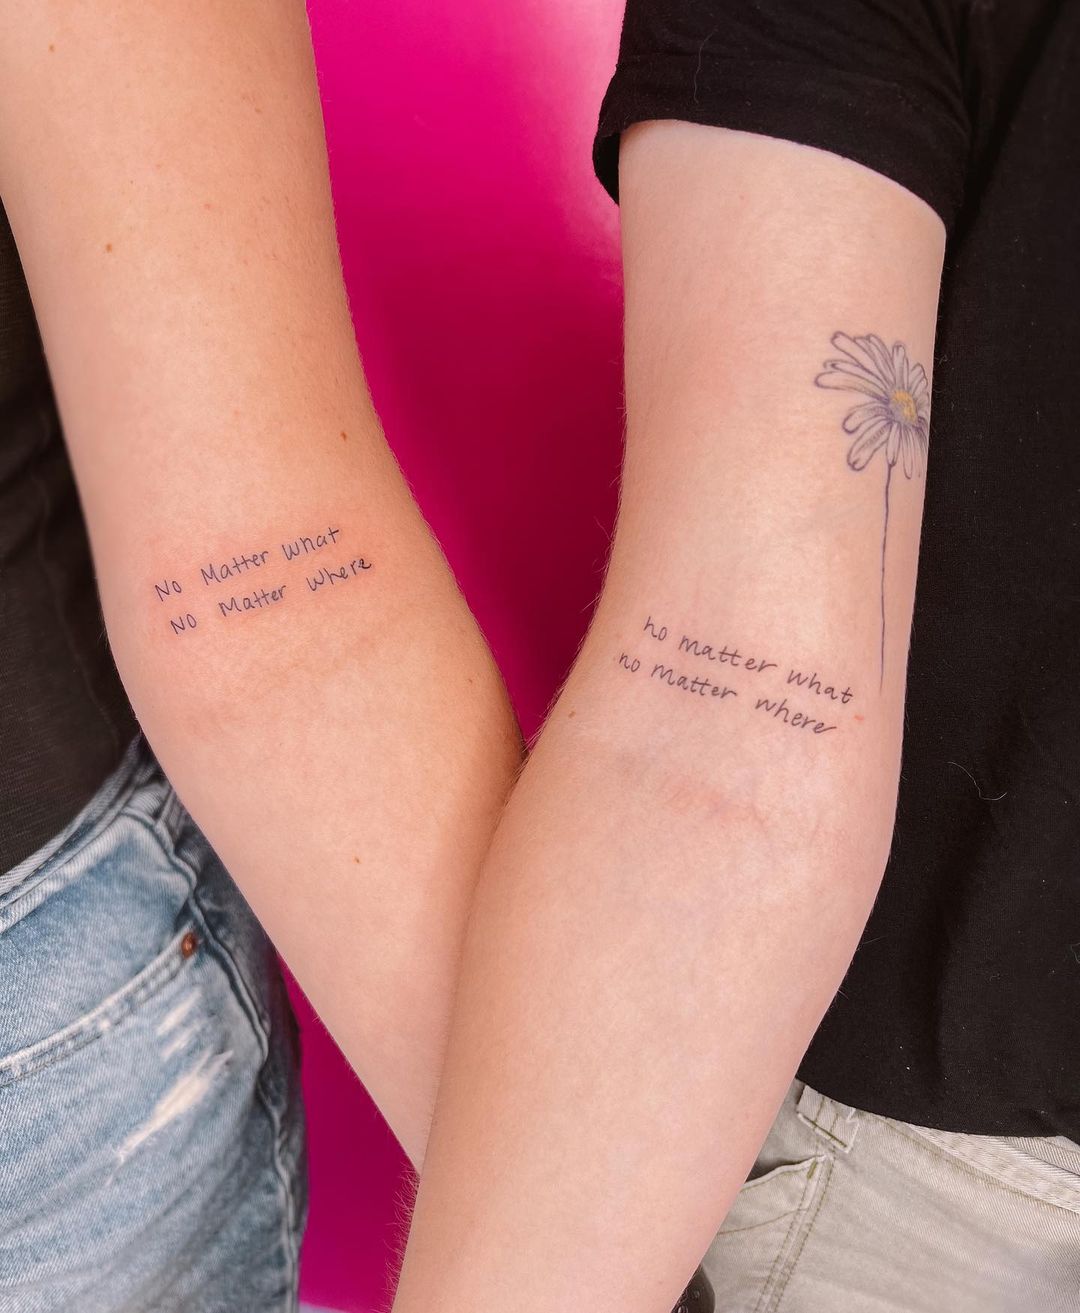 15 Best Friend Tattoo for Friends That Stay Forever! - Wittyduck